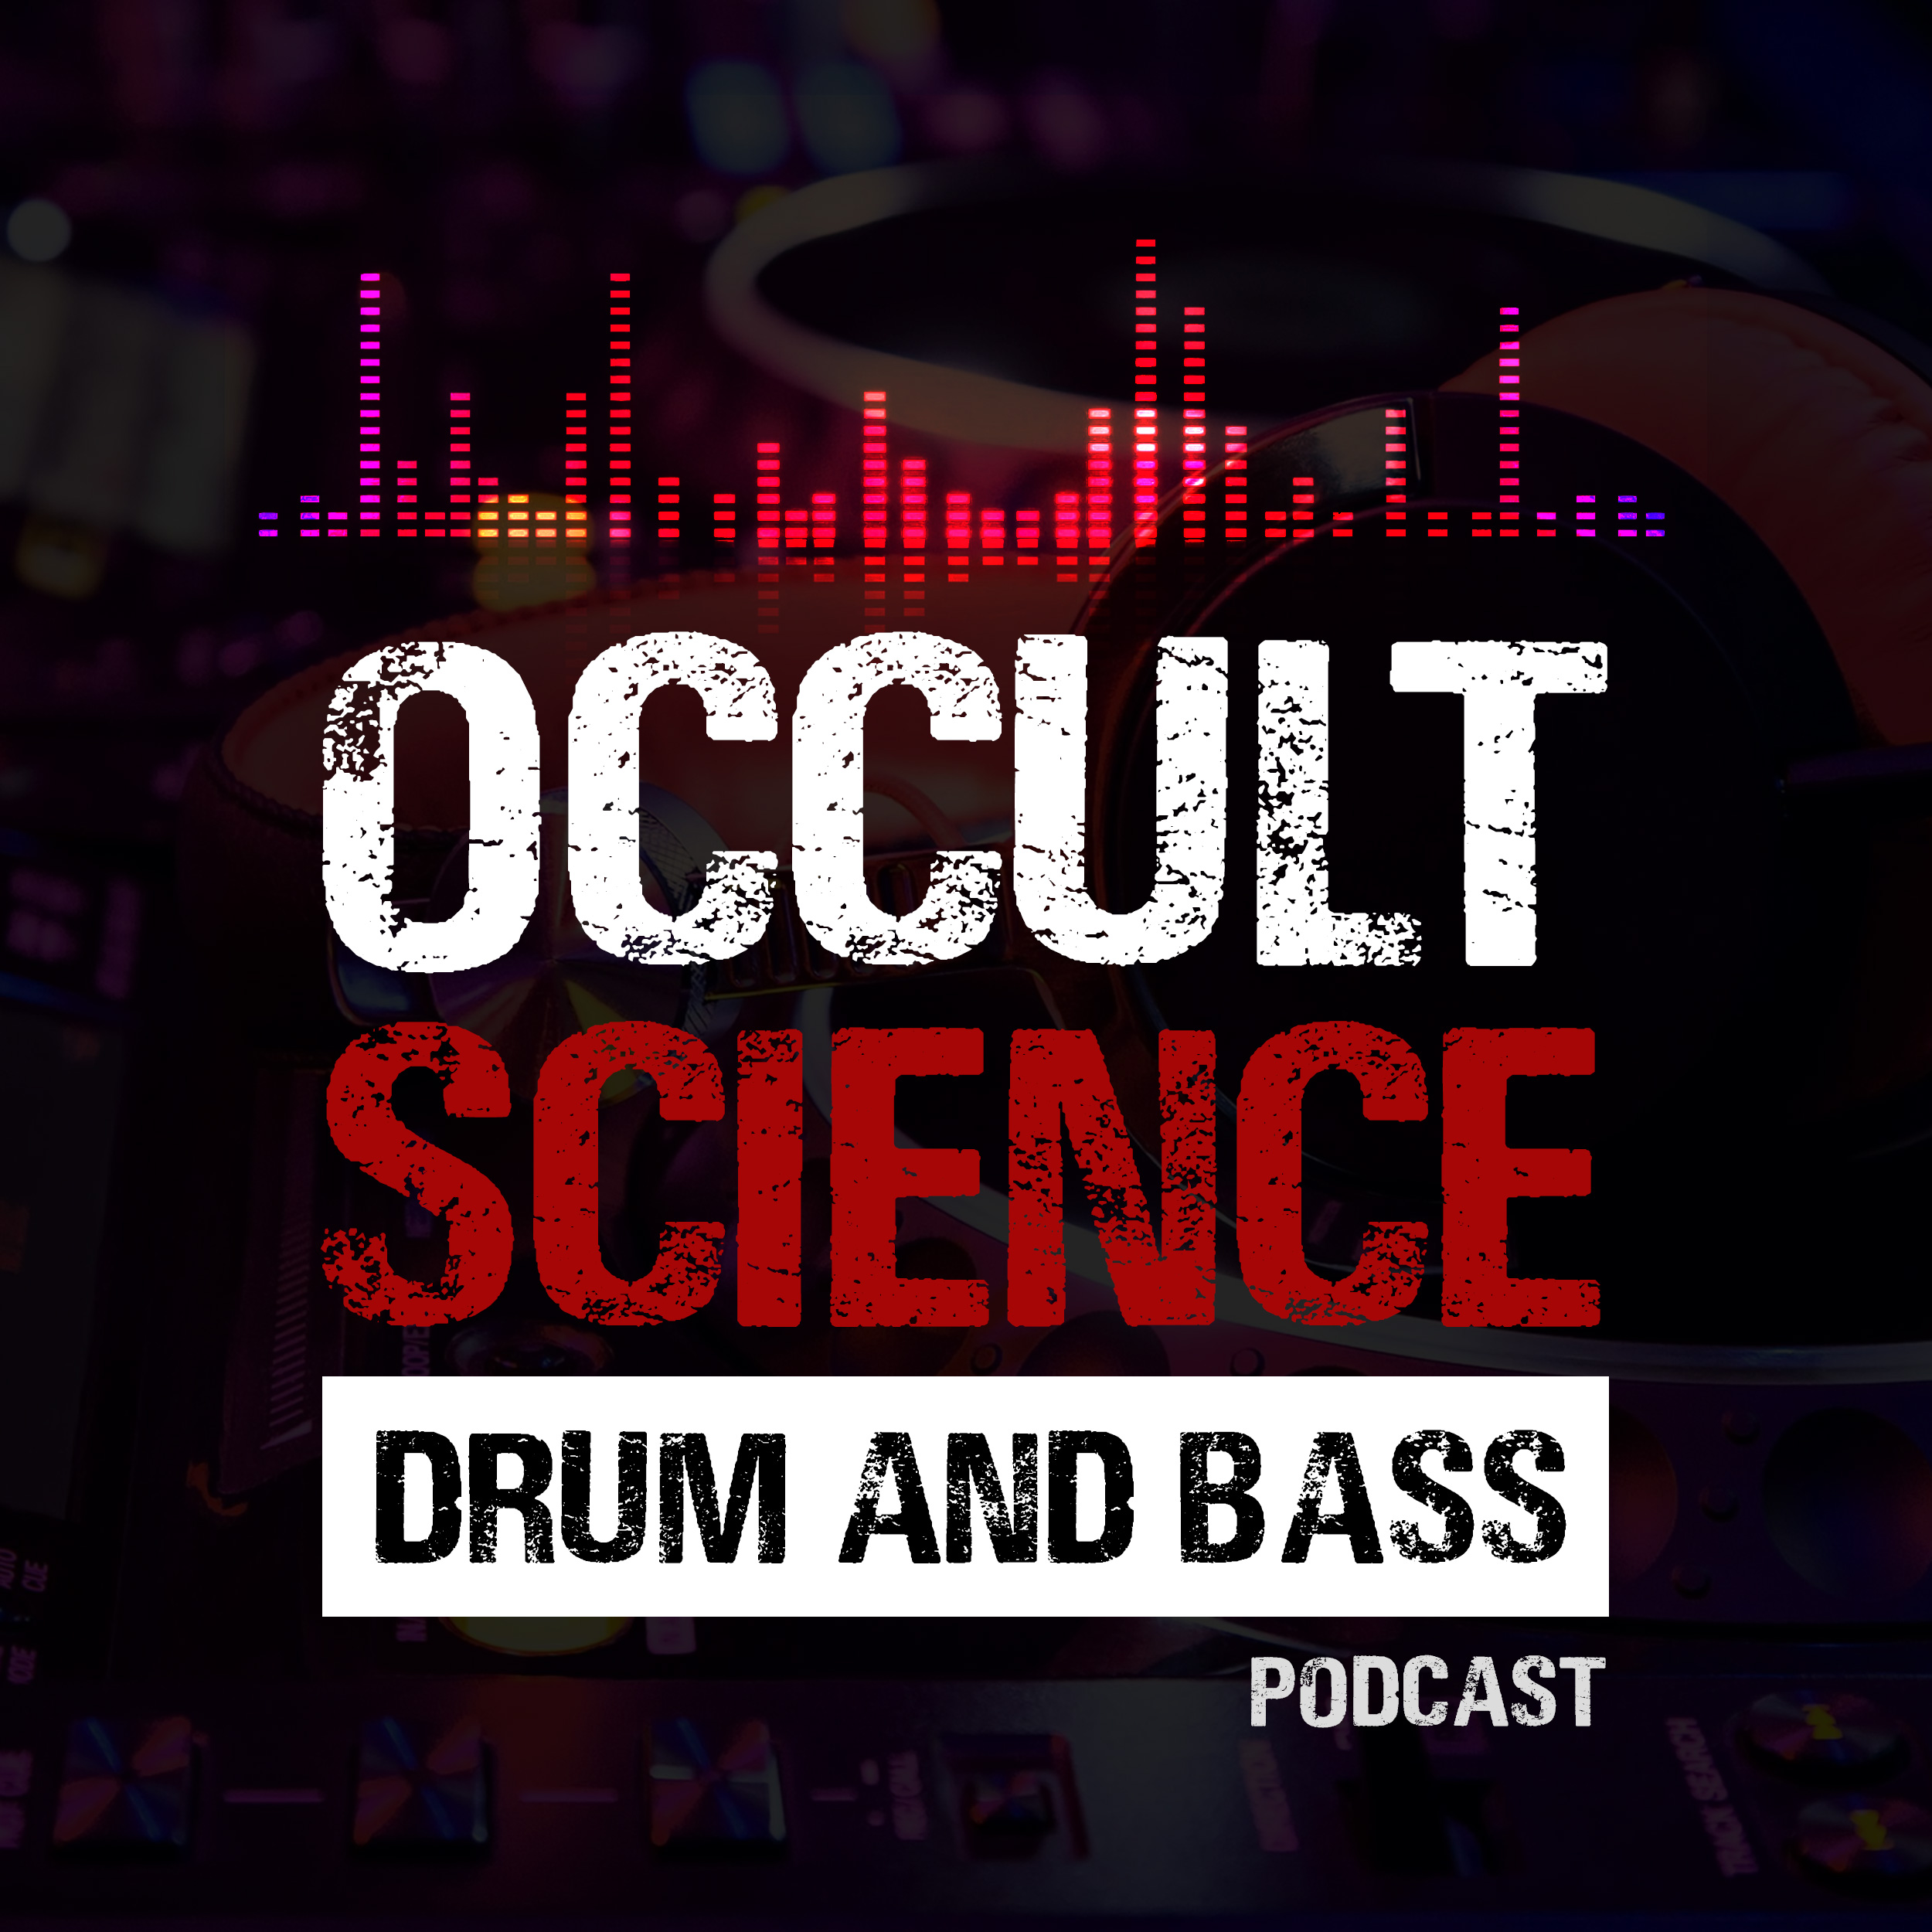 OccultScience Drum and Bass Podcast cover art